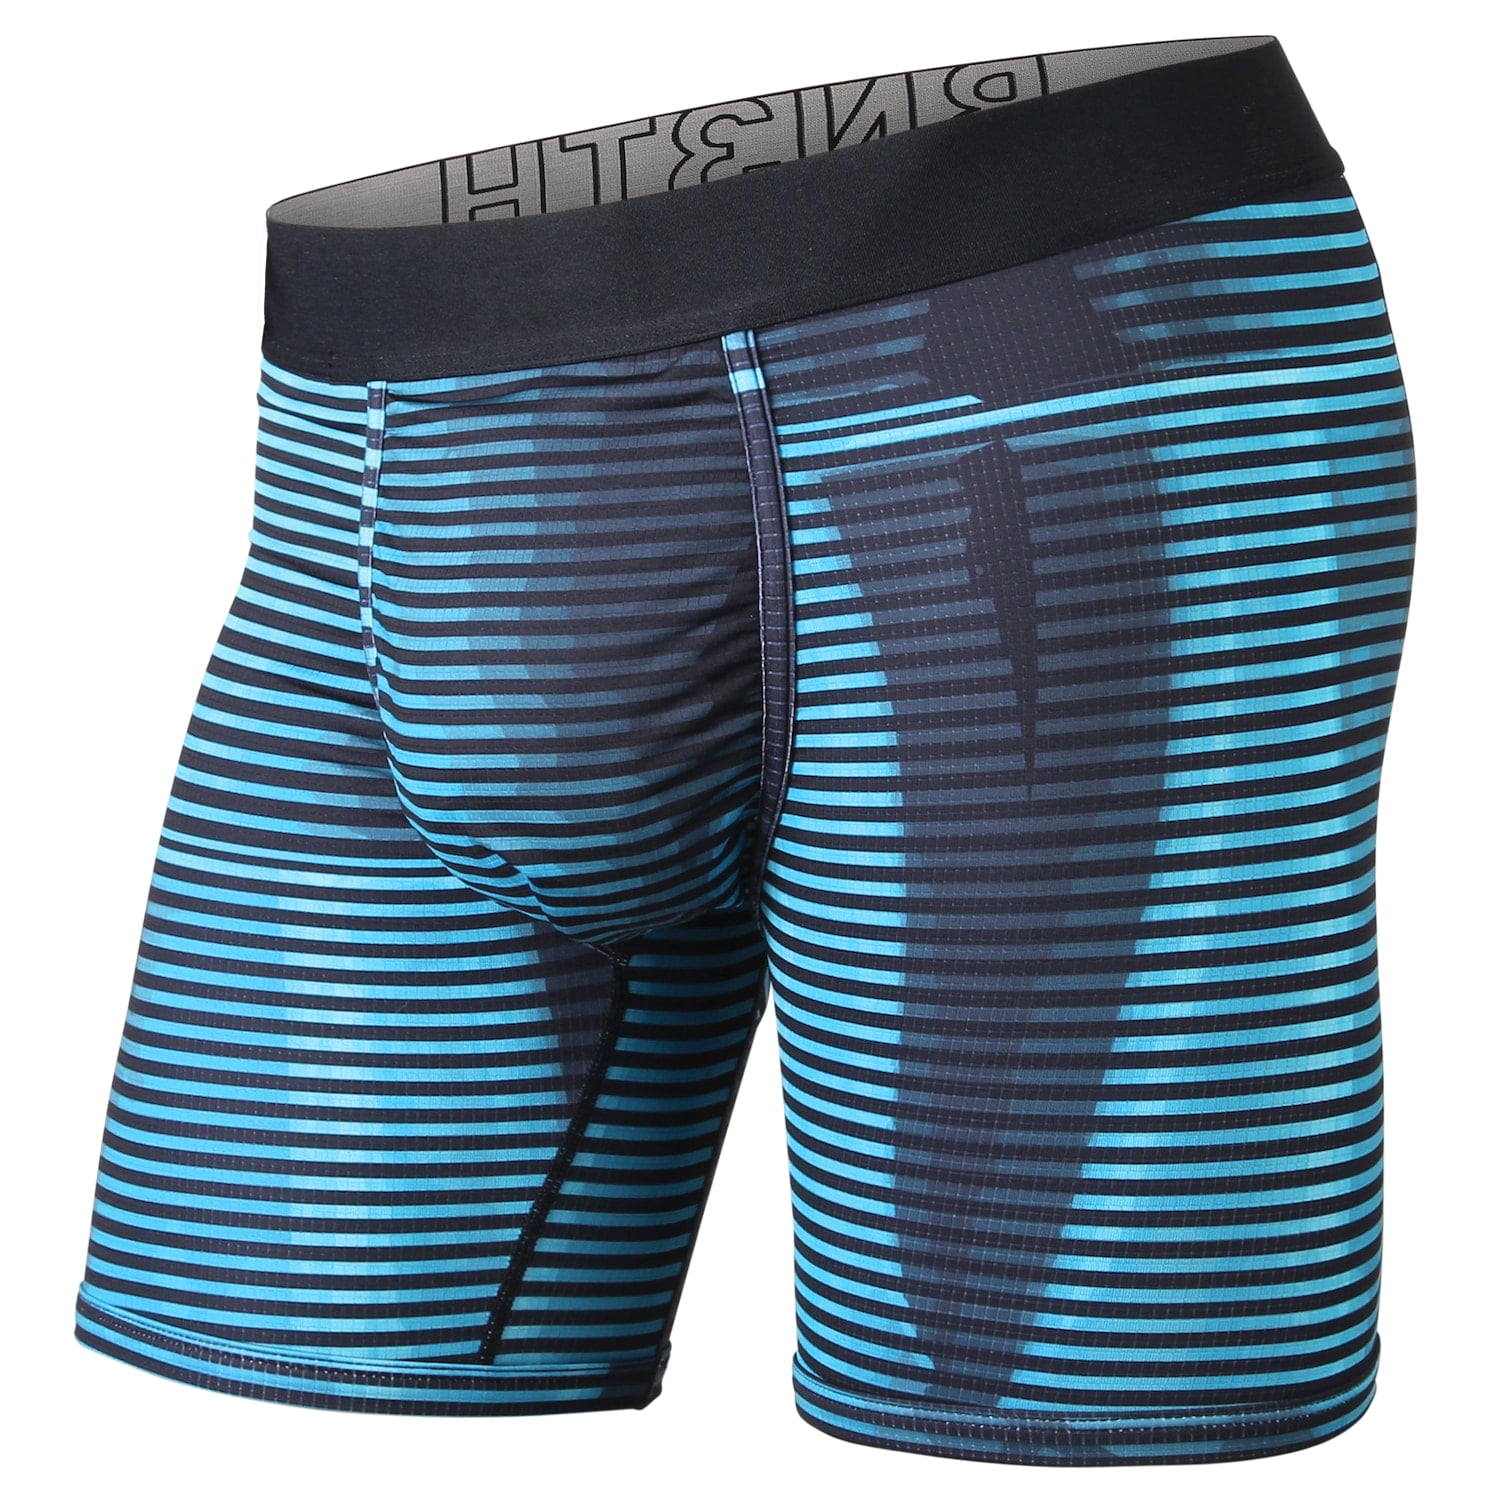 BN3TH Entourage Boxer Brief (X-Ray Teal, X-Small) 